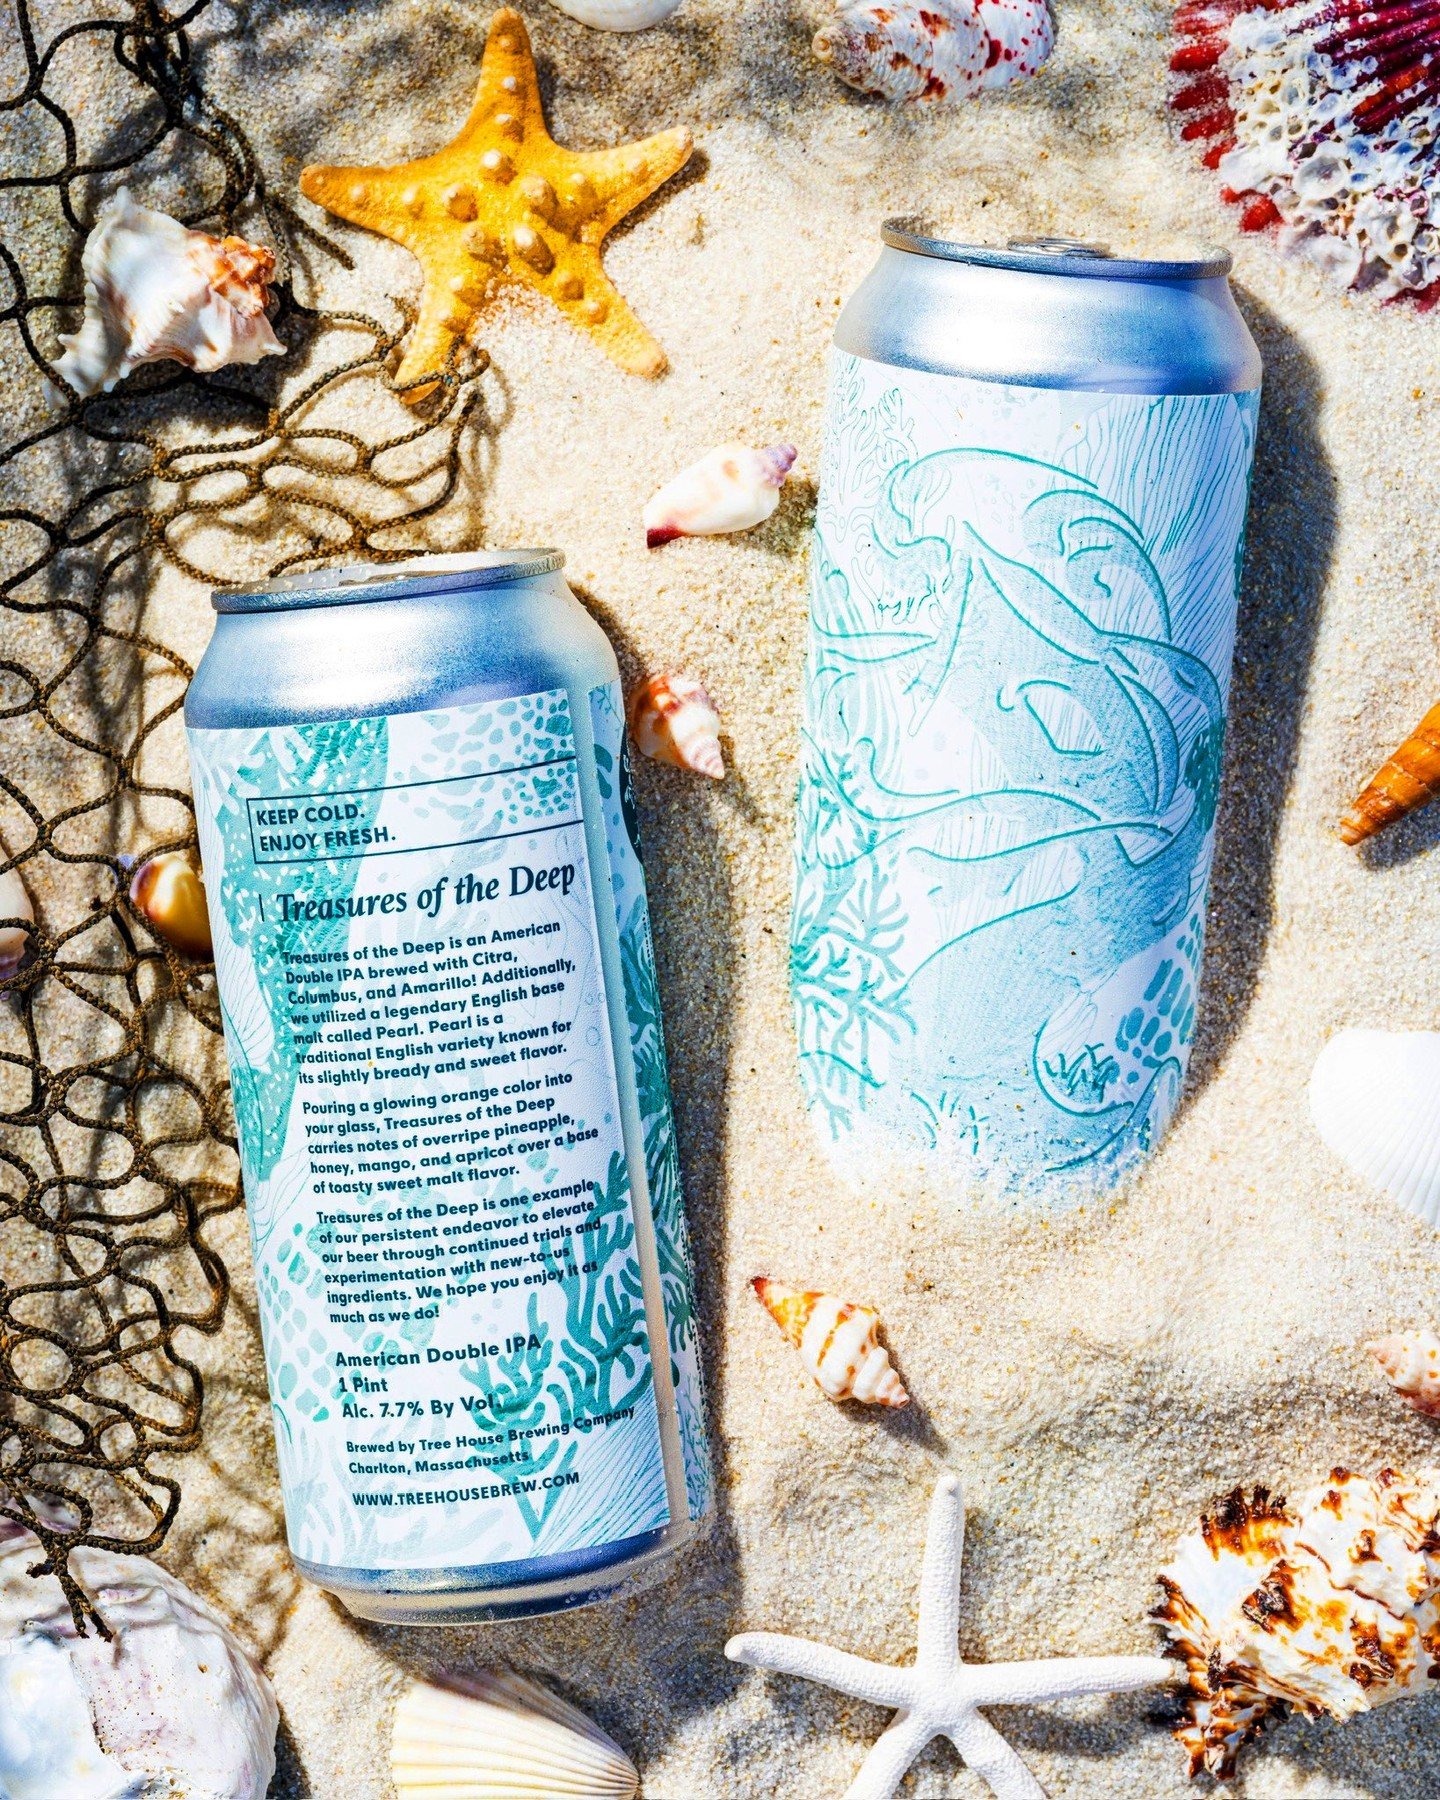 Treasures of the Deep is an American Double IPA brewed with Citra, Columbus, and Amarillo! Additionally, we utilized a legendary English base malt called Pearl. Pearl is a traditional English variety known for its slightly bready and sweet flavor. 

